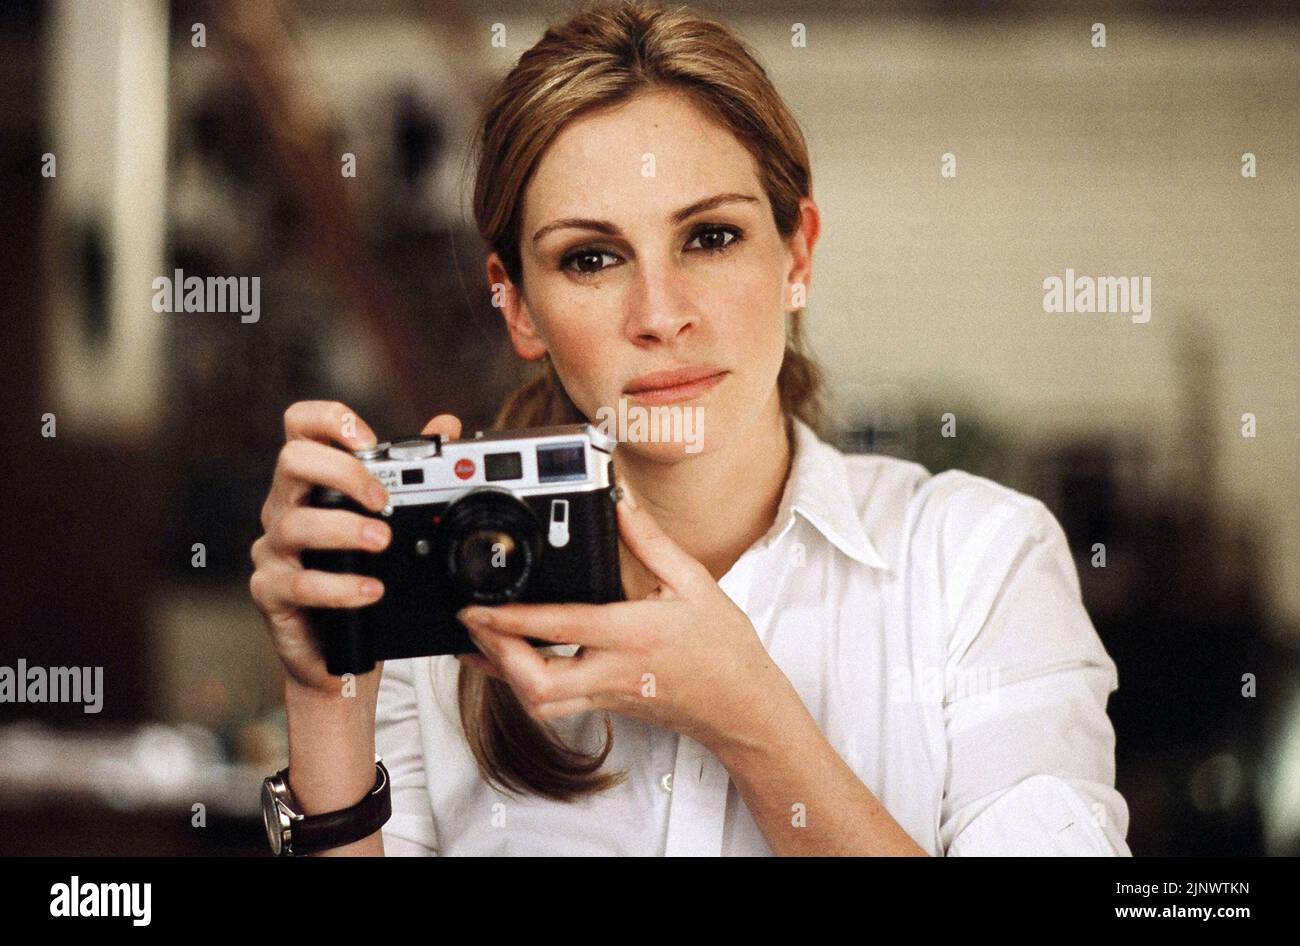 JULIA ROBERTS in CLOSER (2004), directed by MIKE NICHOLS. Credit: COLUMBIA PICTURES / Album Stock Photo